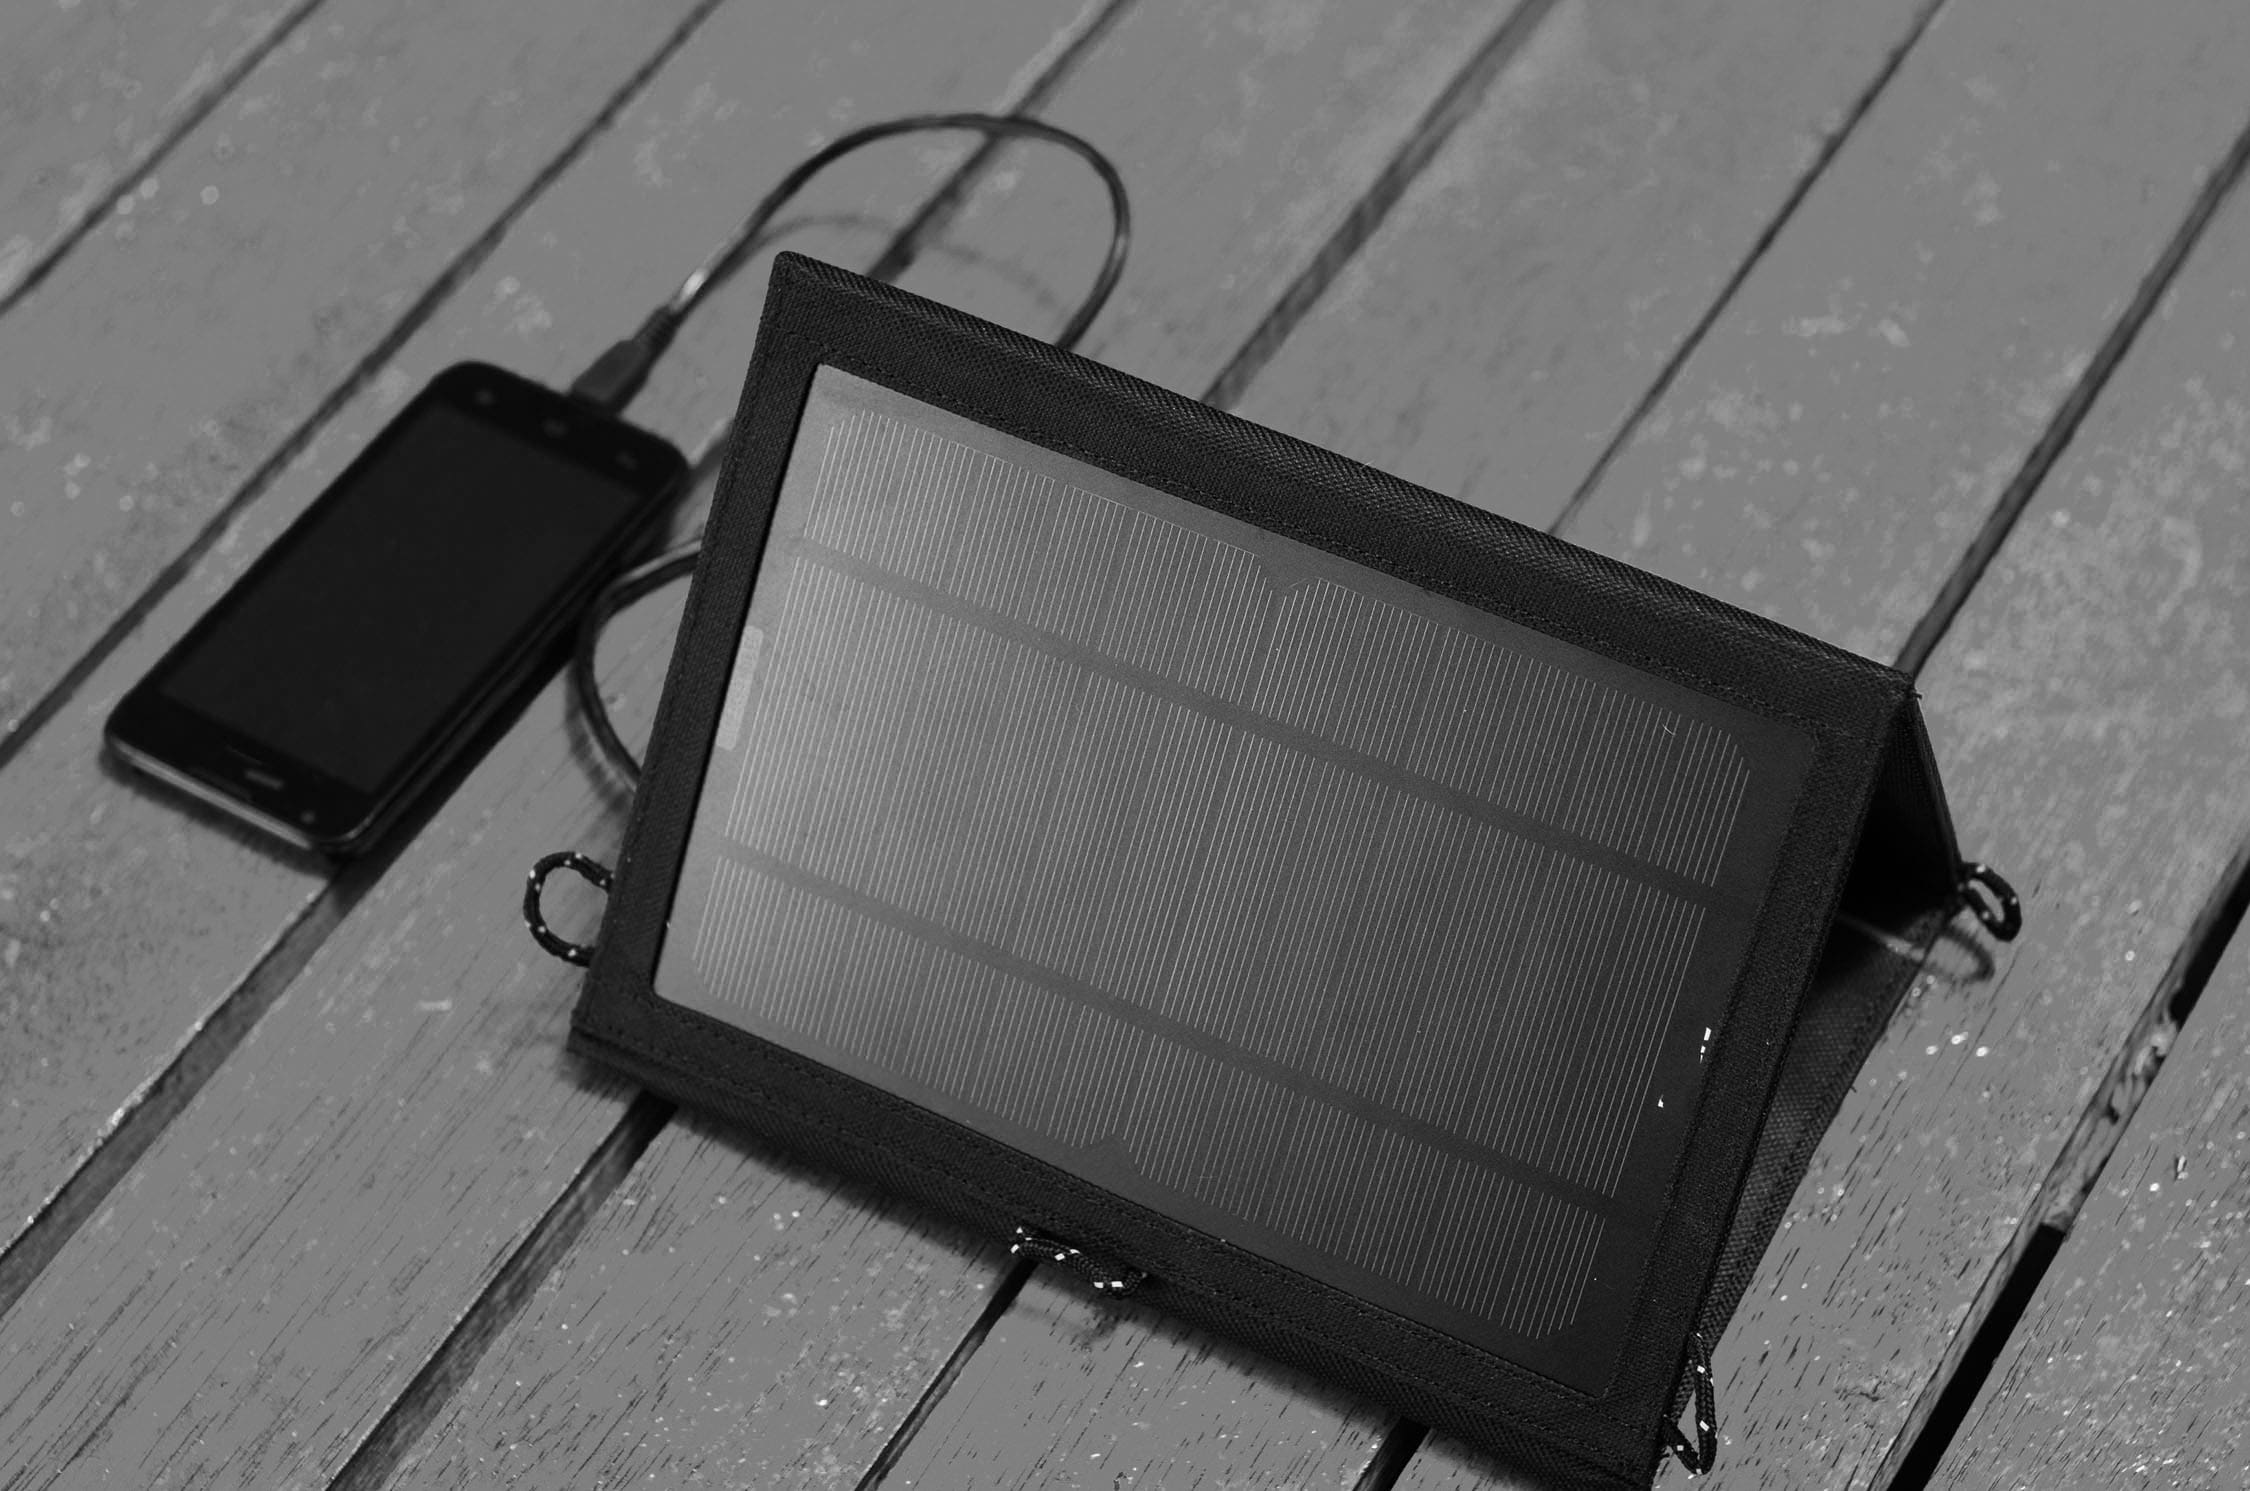 Smart phone being charged using solar power